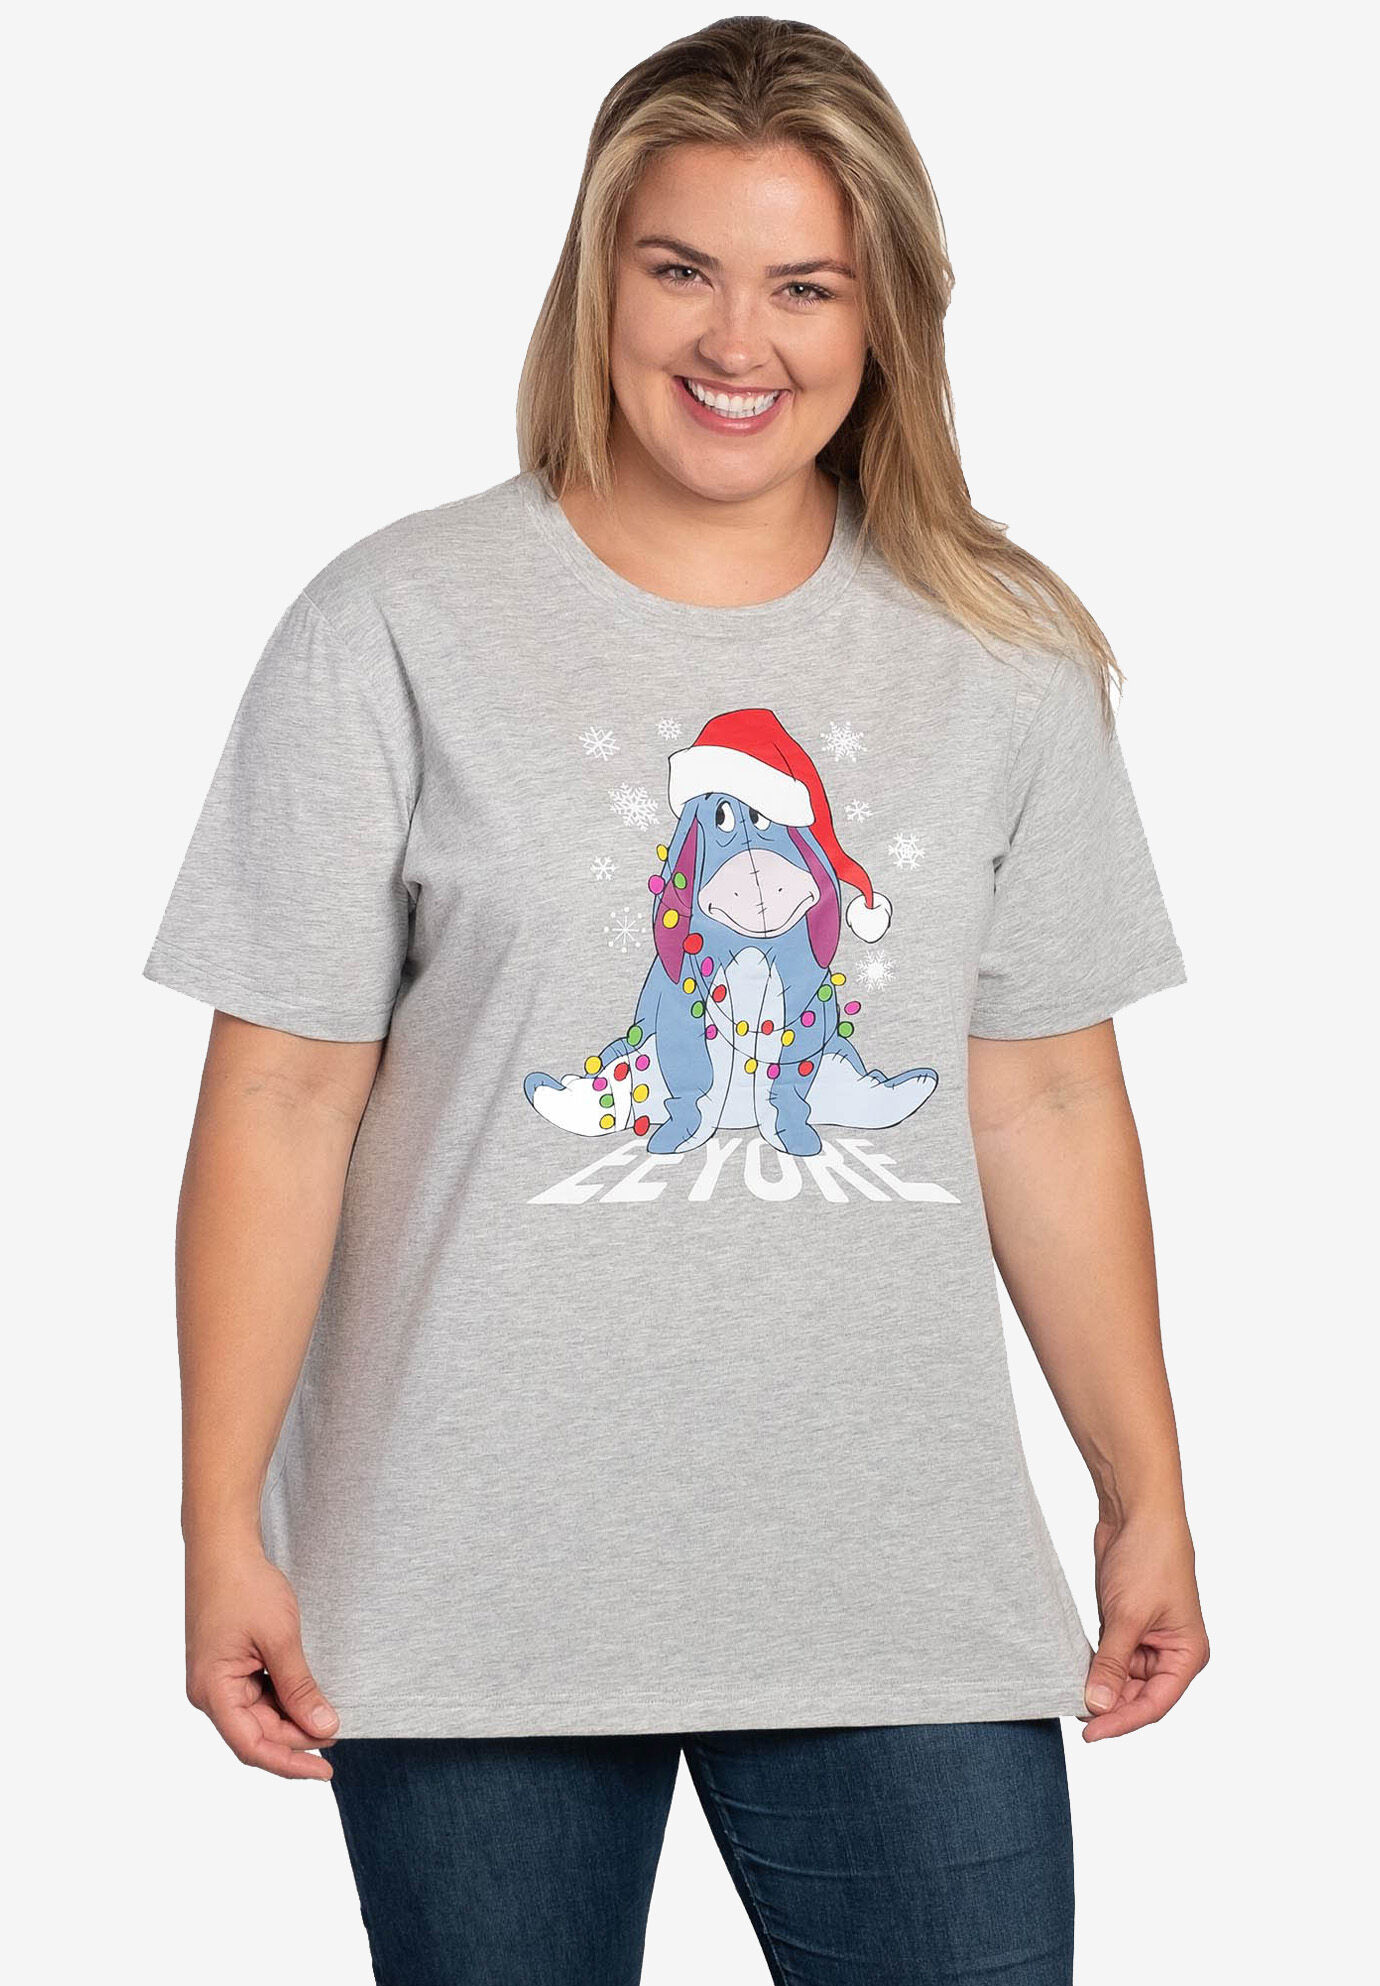 Plus Size Women's Disney Eeyore Christmas T-Shirt Holiday Gray by Disney in Gray (Size 1X (14-16))